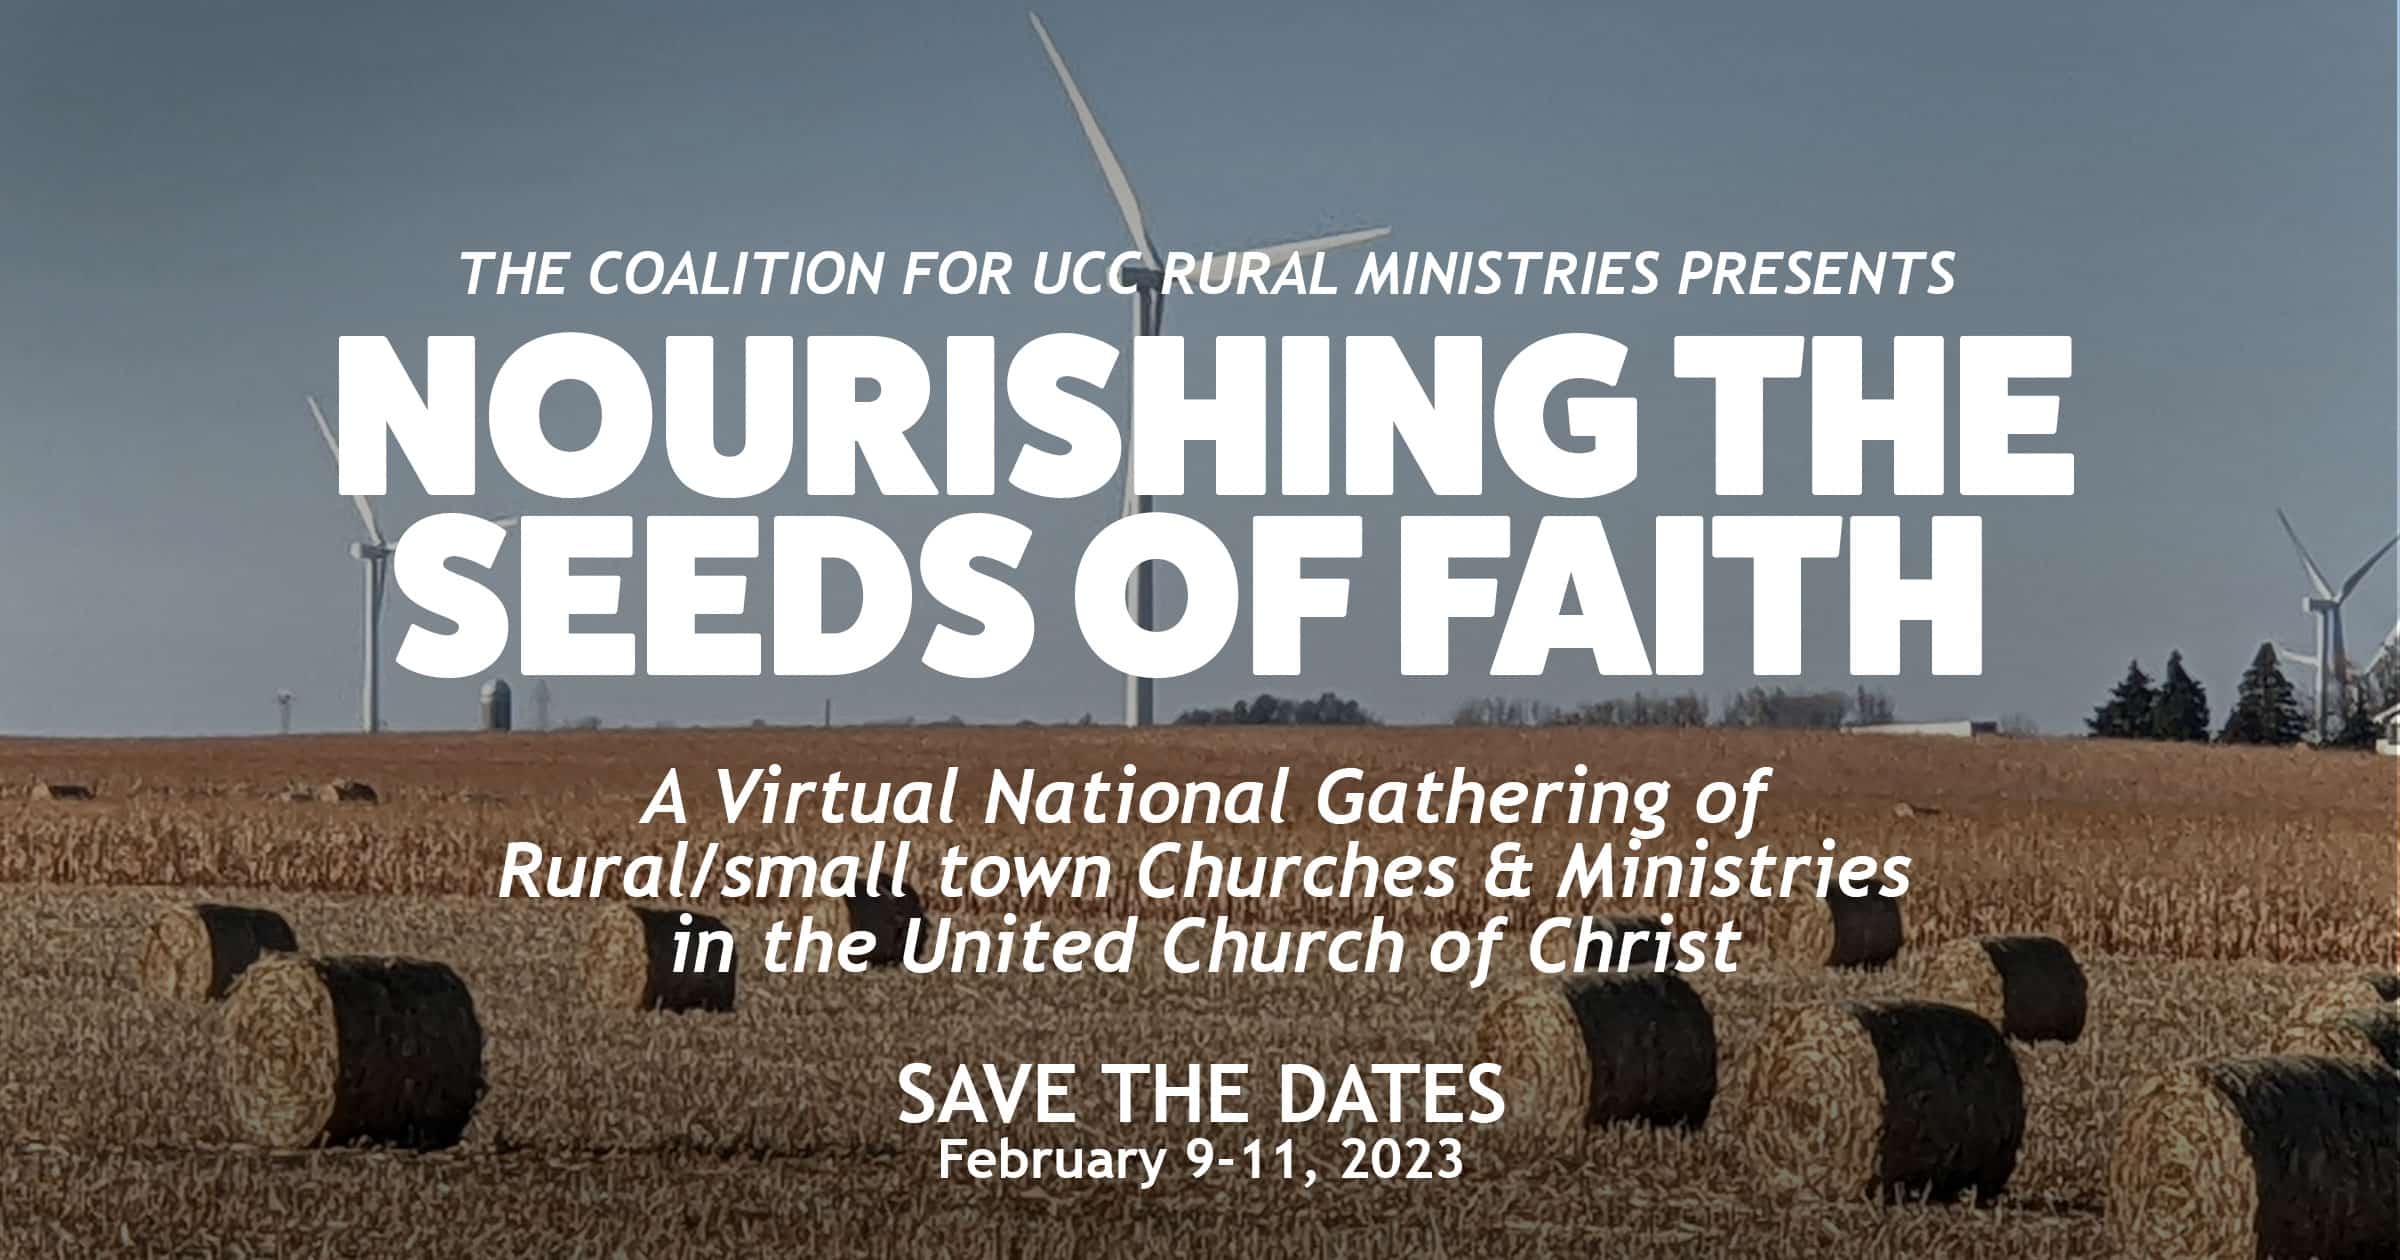 National-Gathering-of-UCC-Rural-and-Small-Town-Congregations-and-Ministries